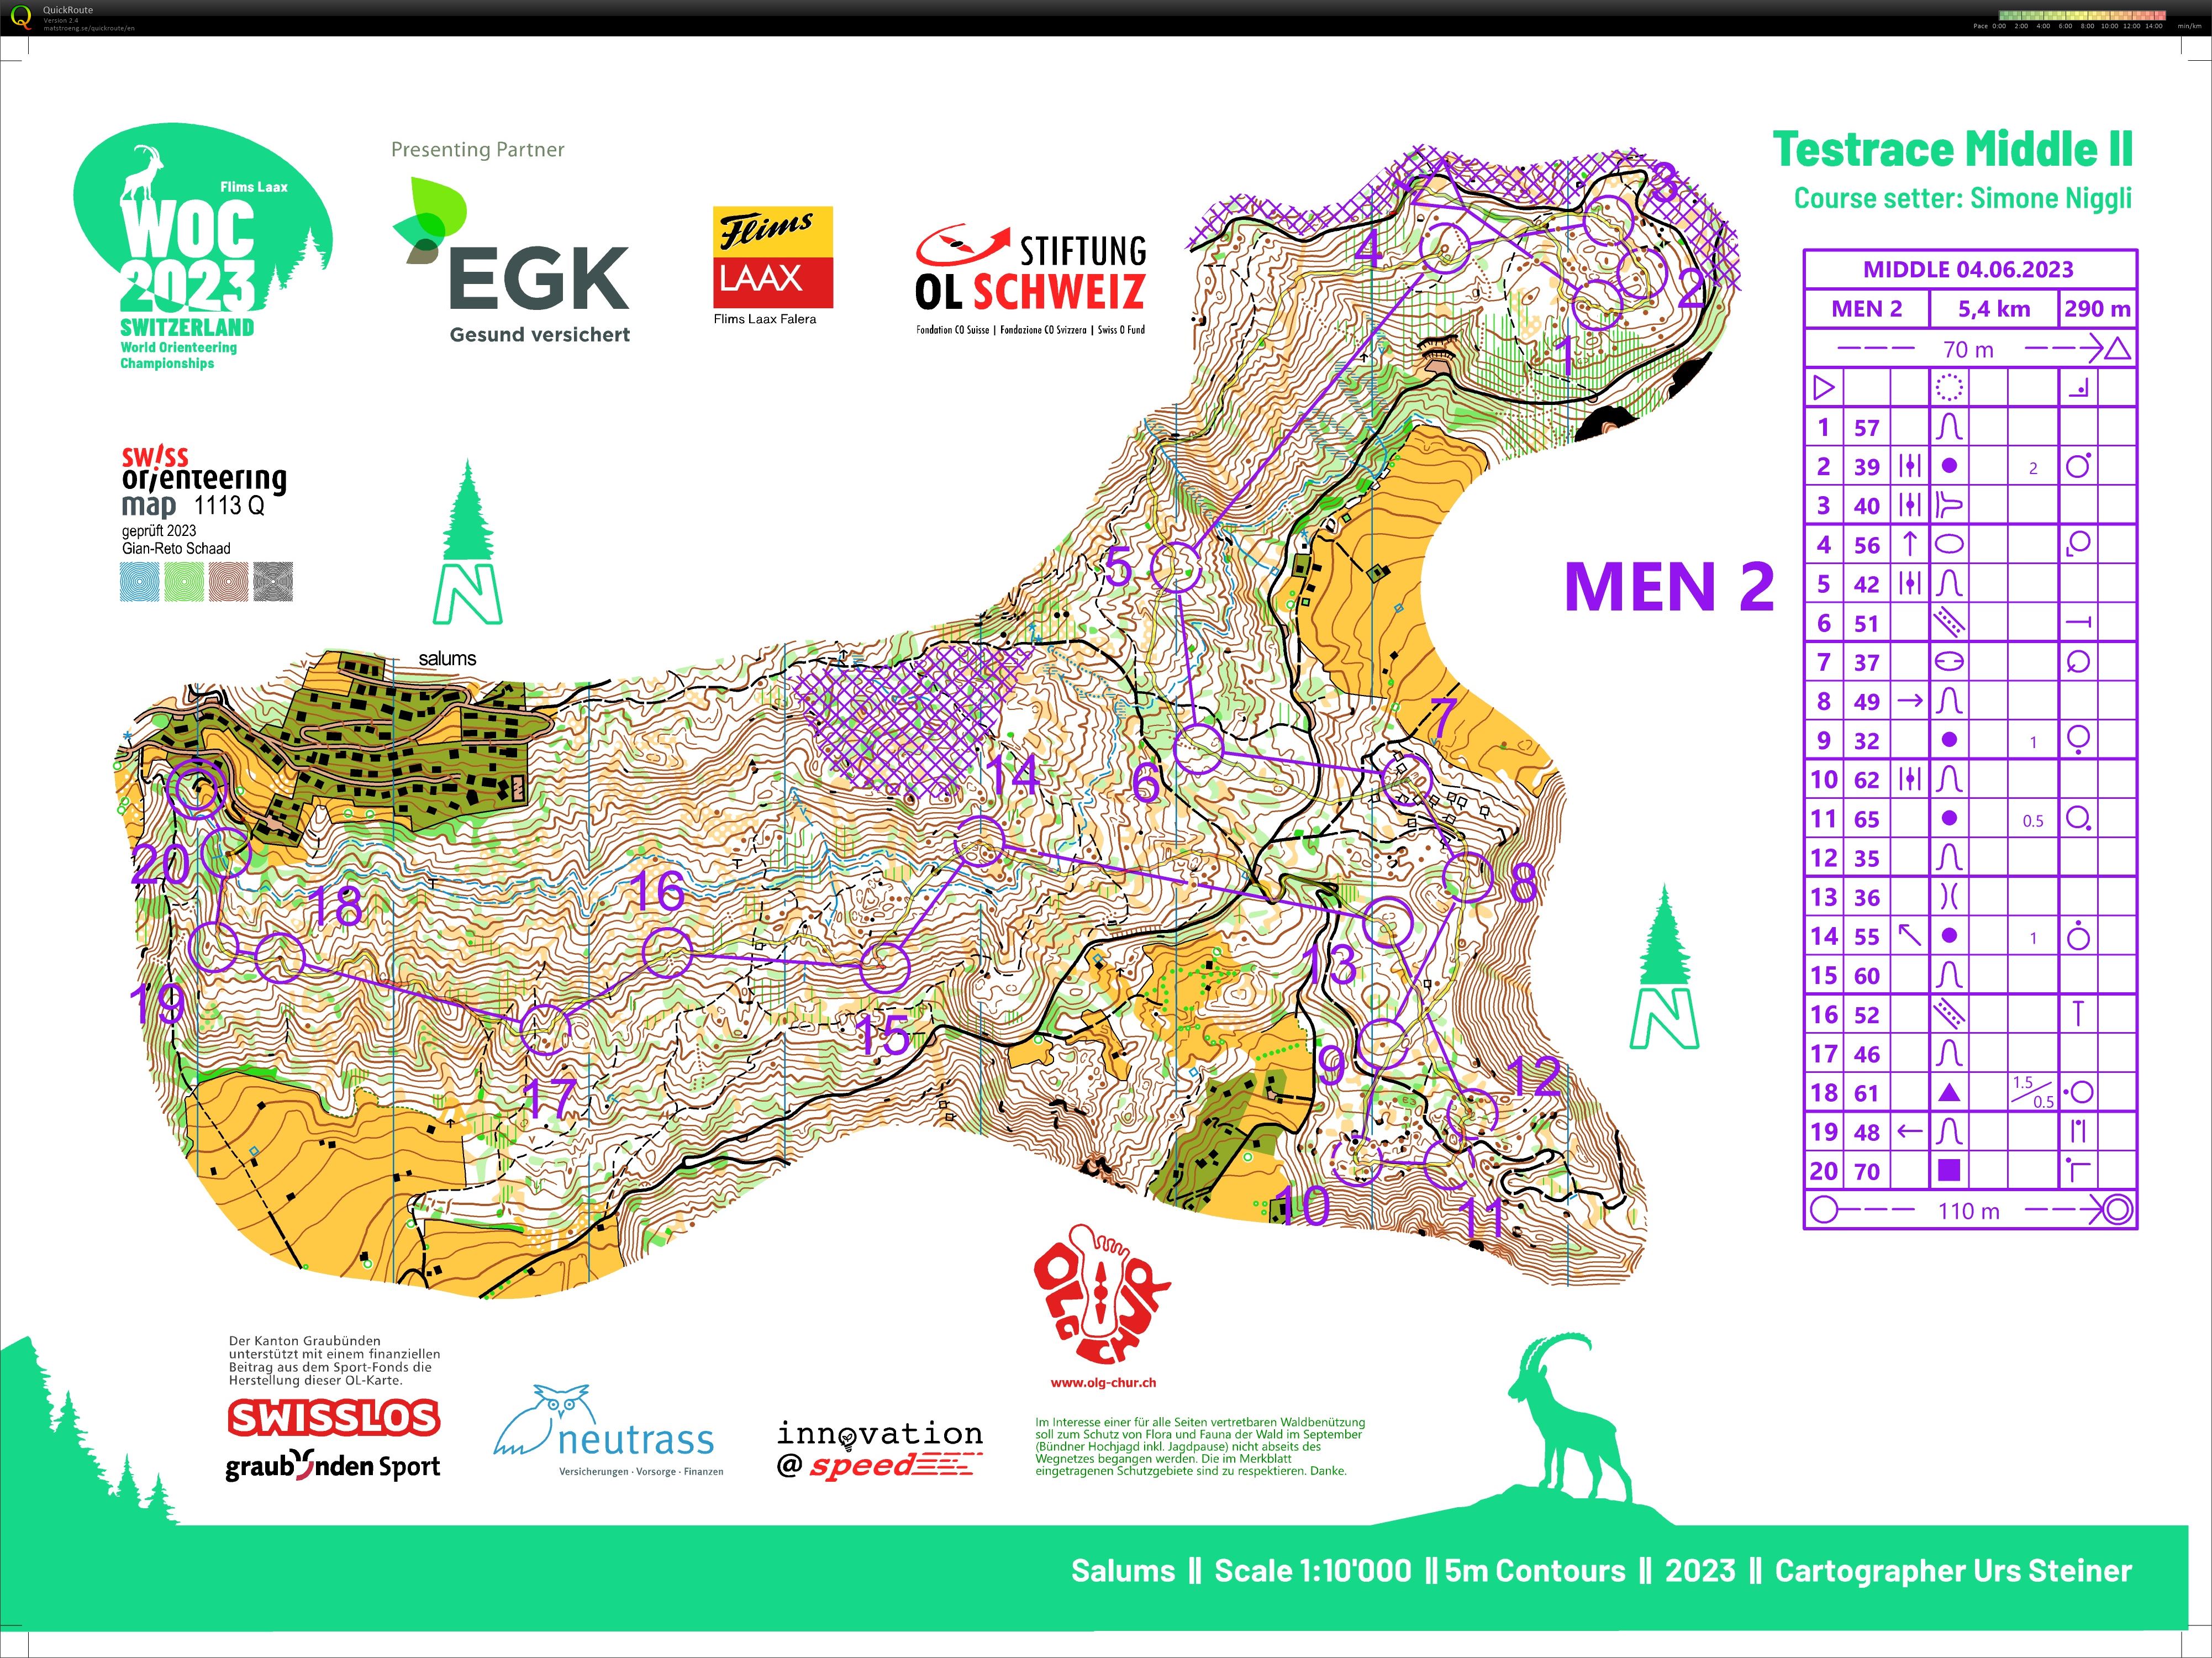 Test Testrace WOC Middle #2 (04.06.2023)